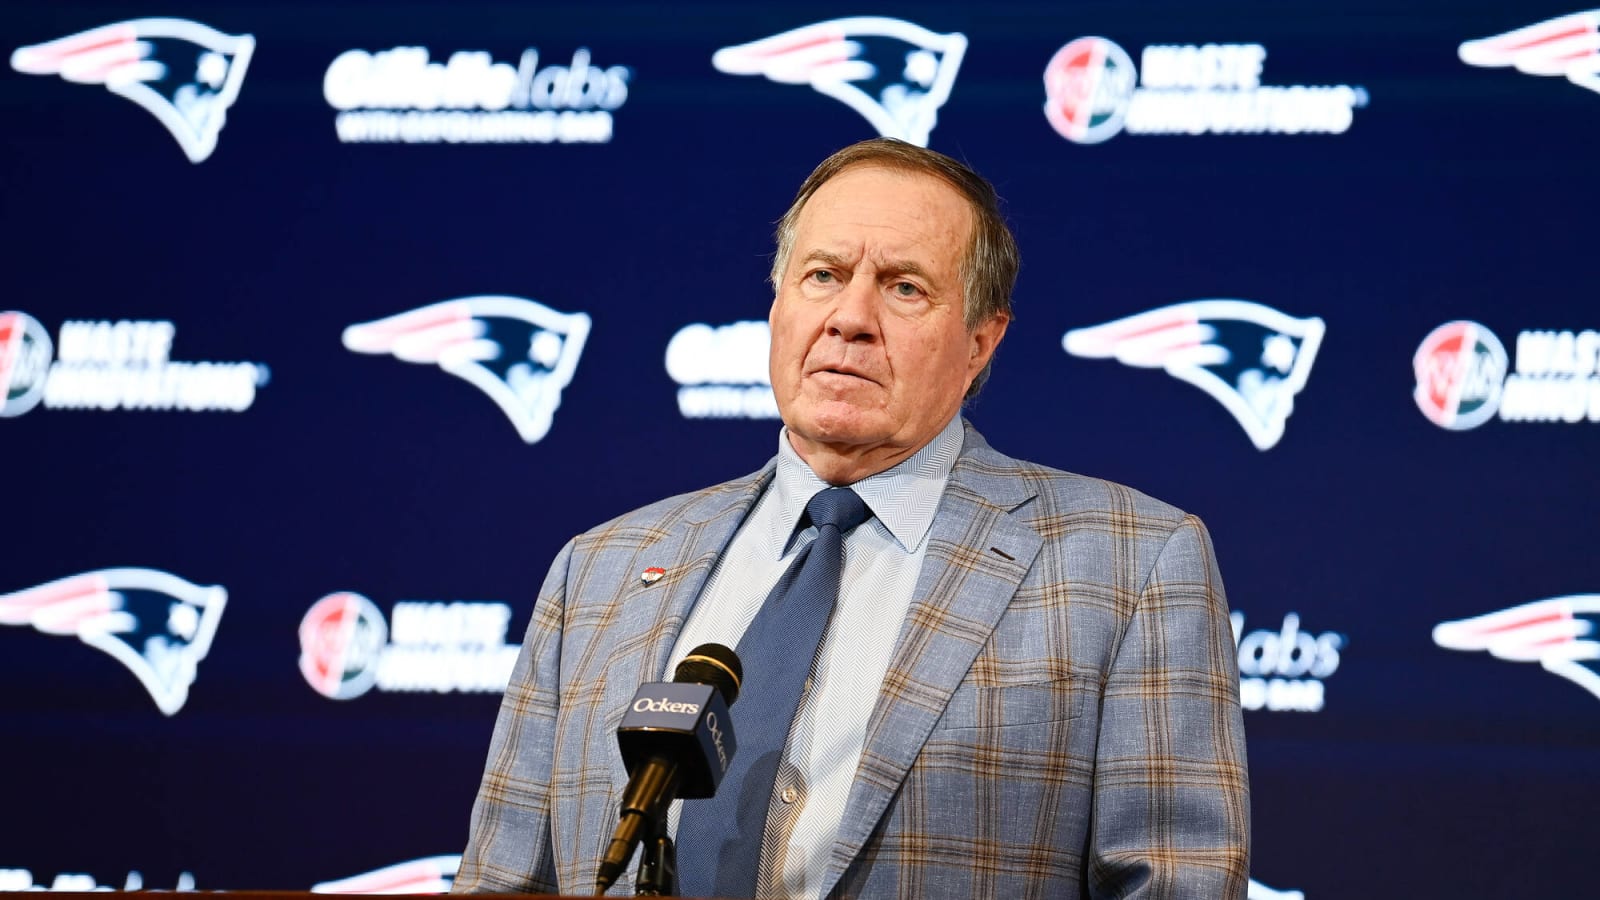 Bill Belichick cautions against Draft stock reports due to heavy ‘agent influence’